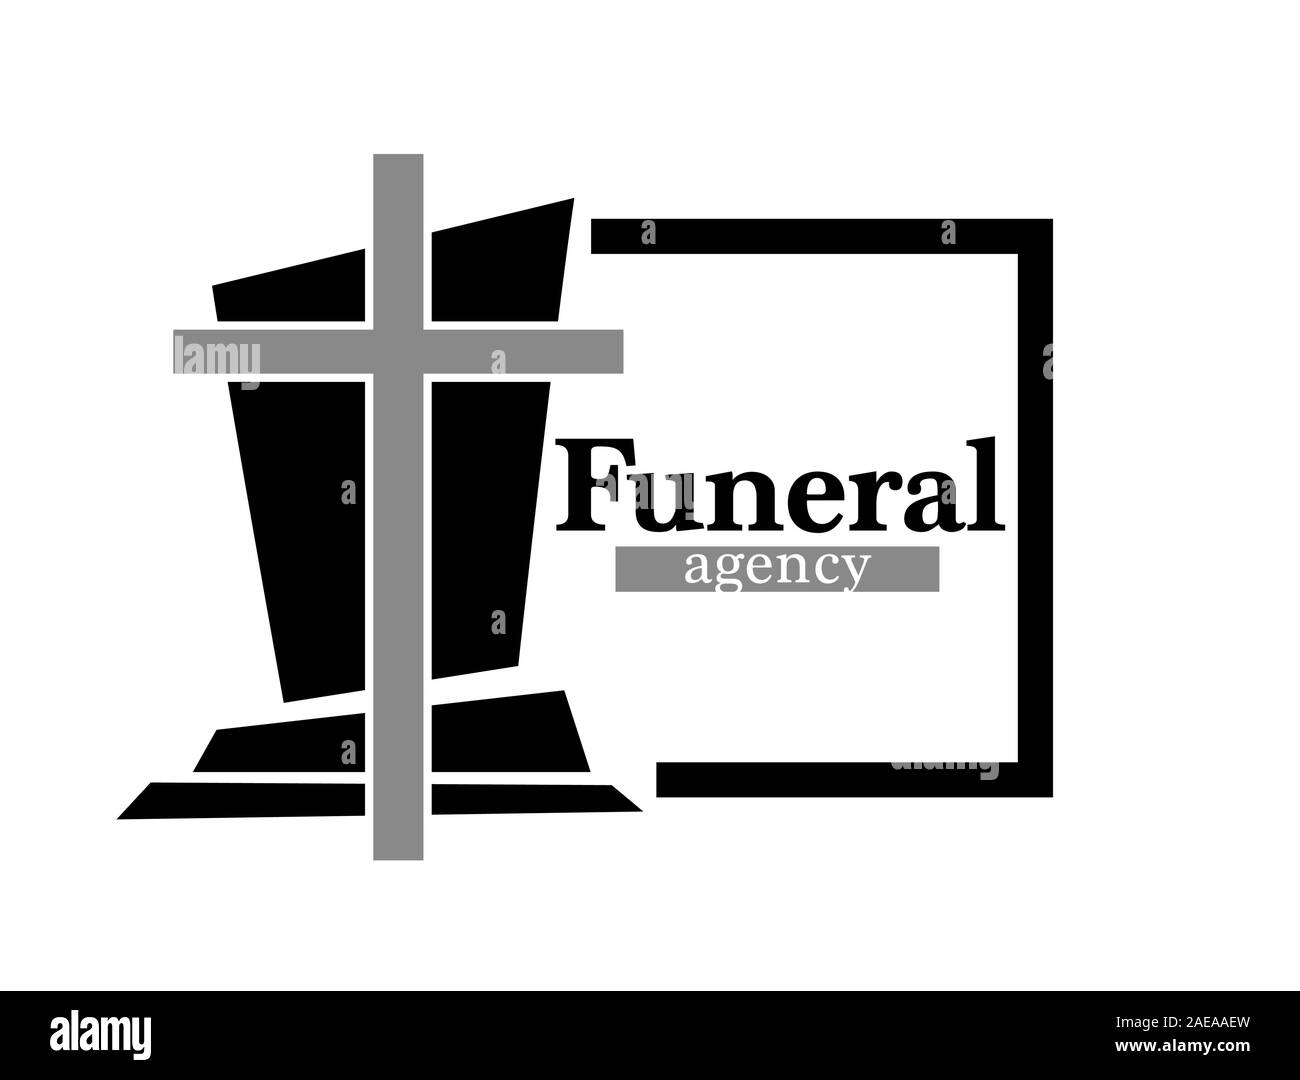 Funeral agency logo with headstone and cross in black frame Stock Vector